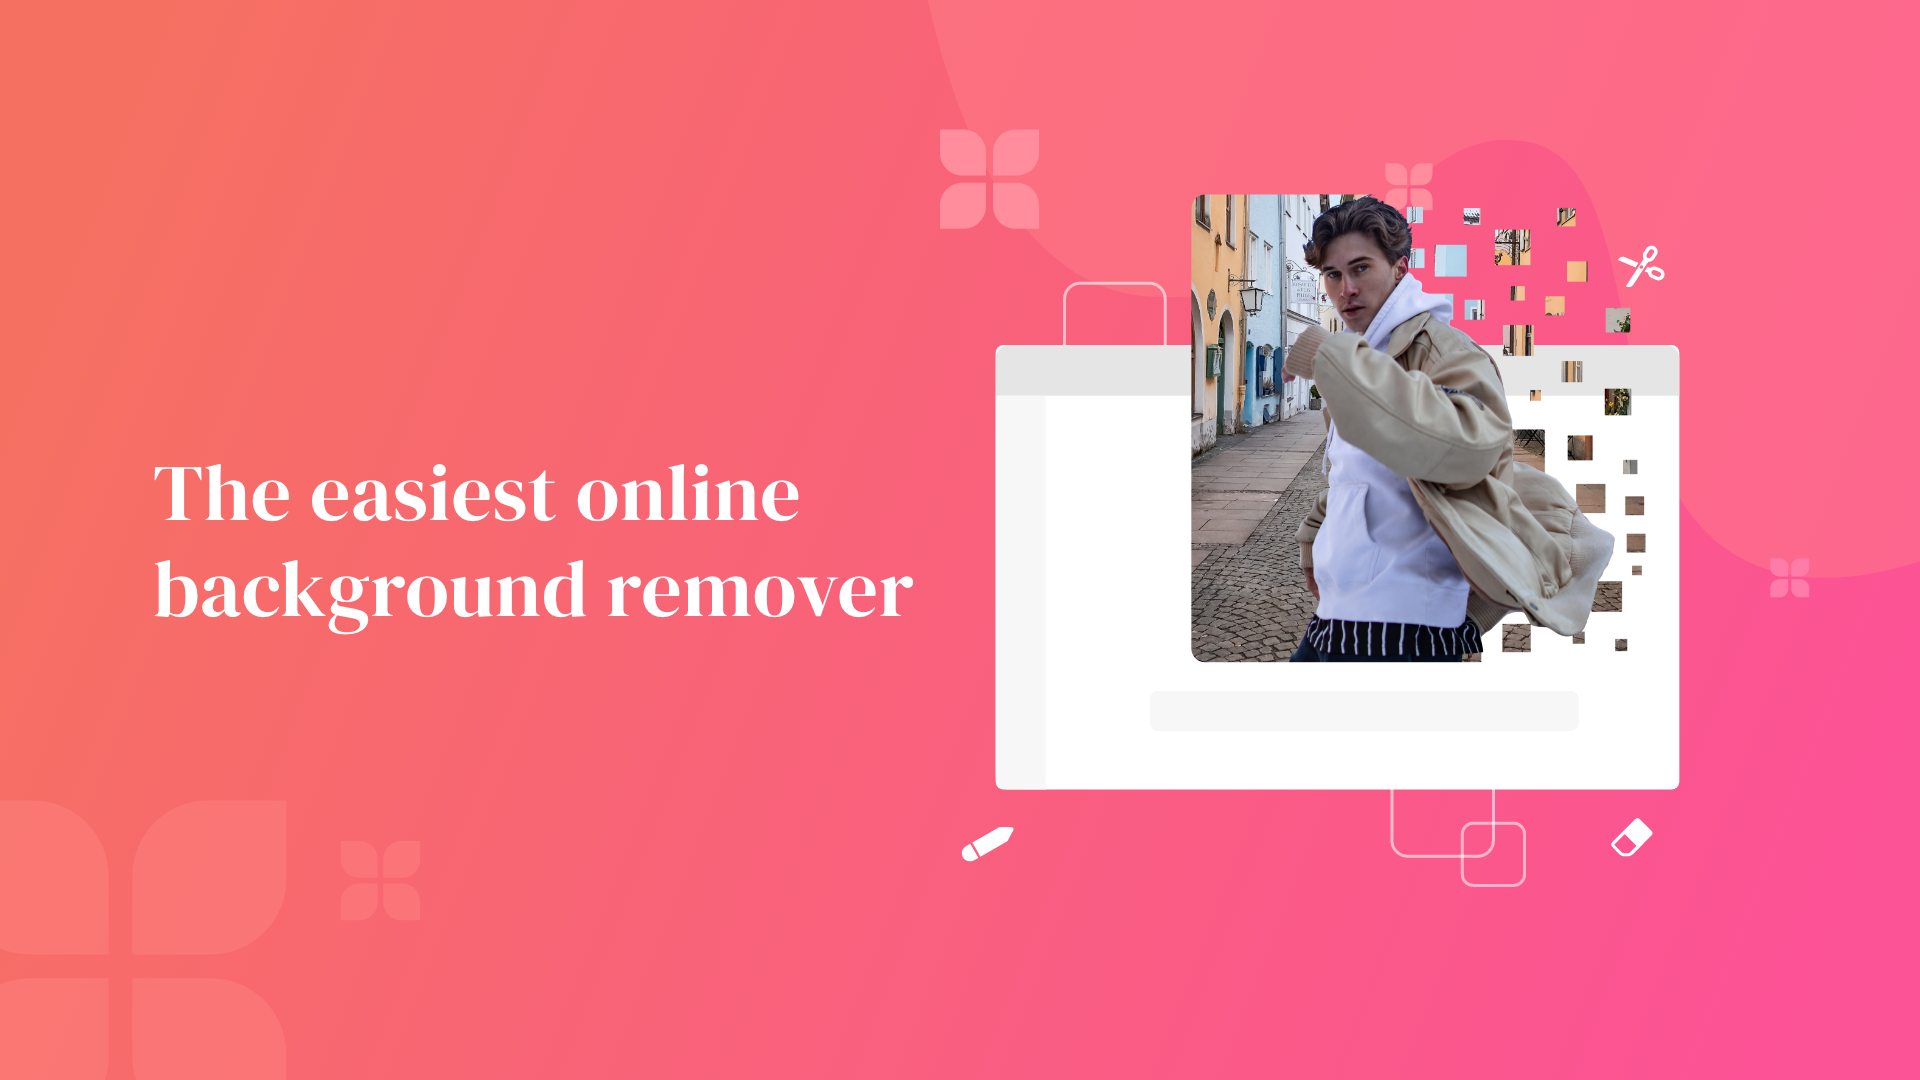 Online Background Remover | Remove BG From Images - Picmaker